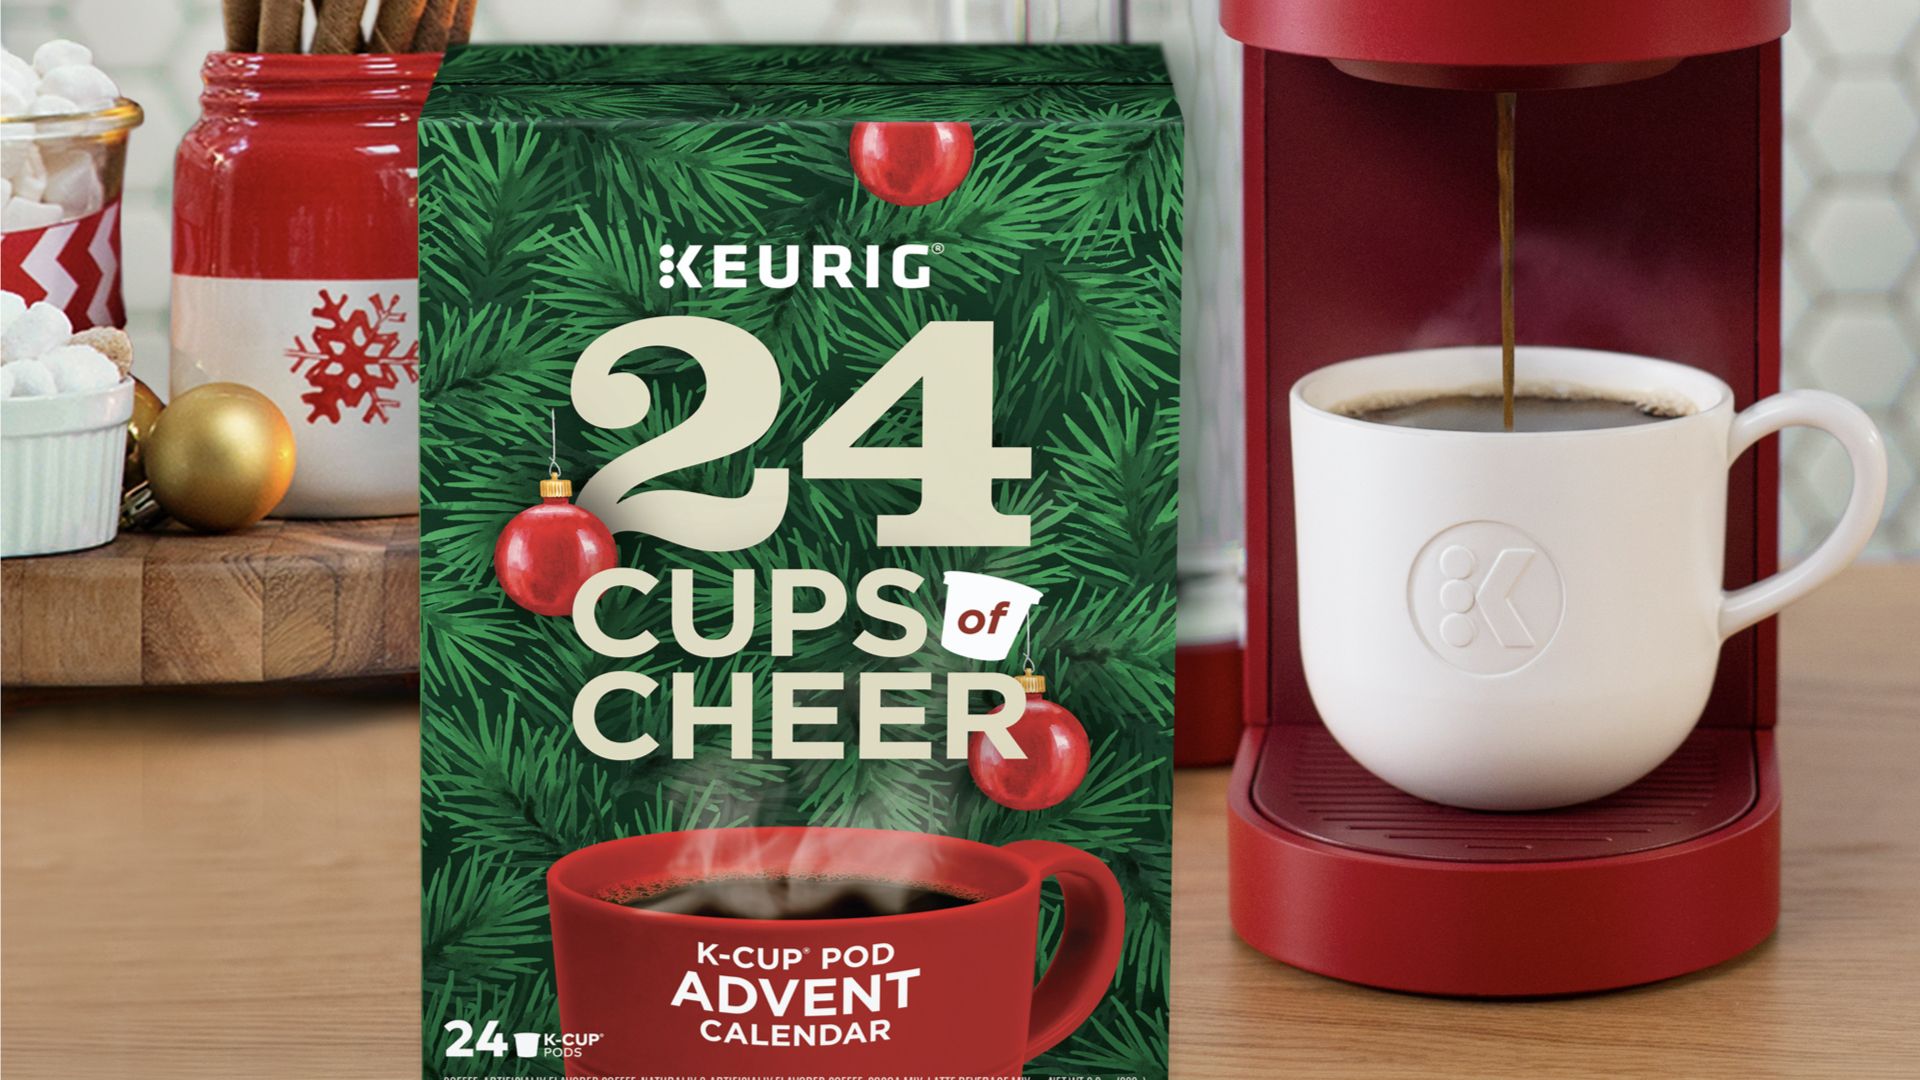 Keurig launches 24 Cups of Cheer advent calendar Tom's Guide